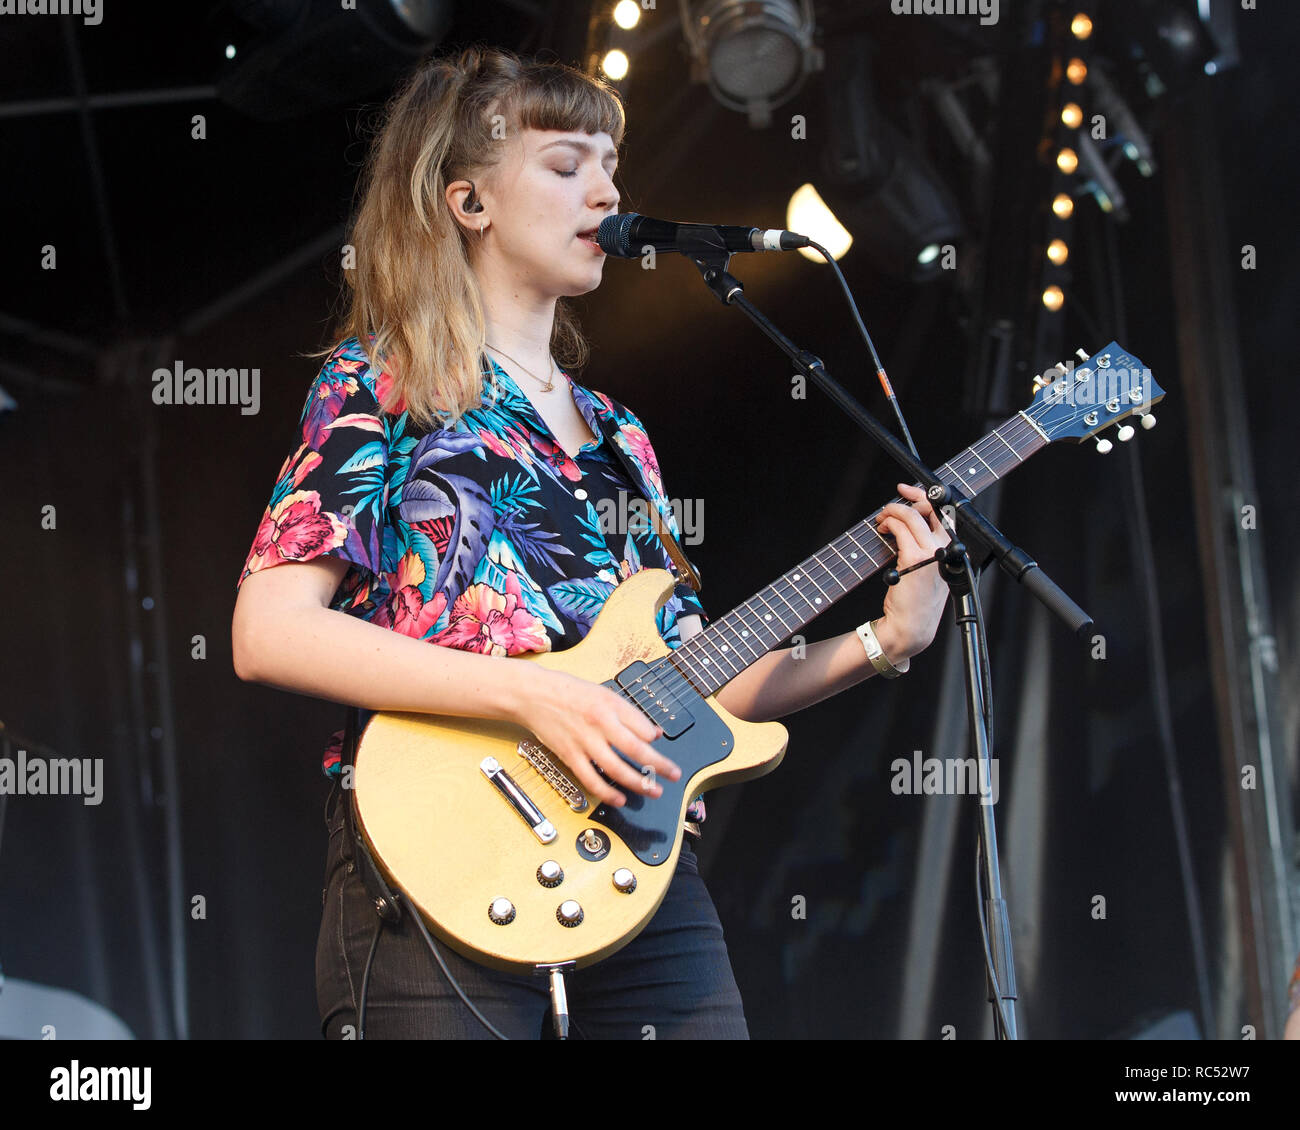 A Gibson Les Paul guitar being played live onstage by Juliette Jackson of British alternative rock band The Big Moon. Female Les Paul guitarist, Jules Jackson, The Big Moon lead singer. Stock Photo